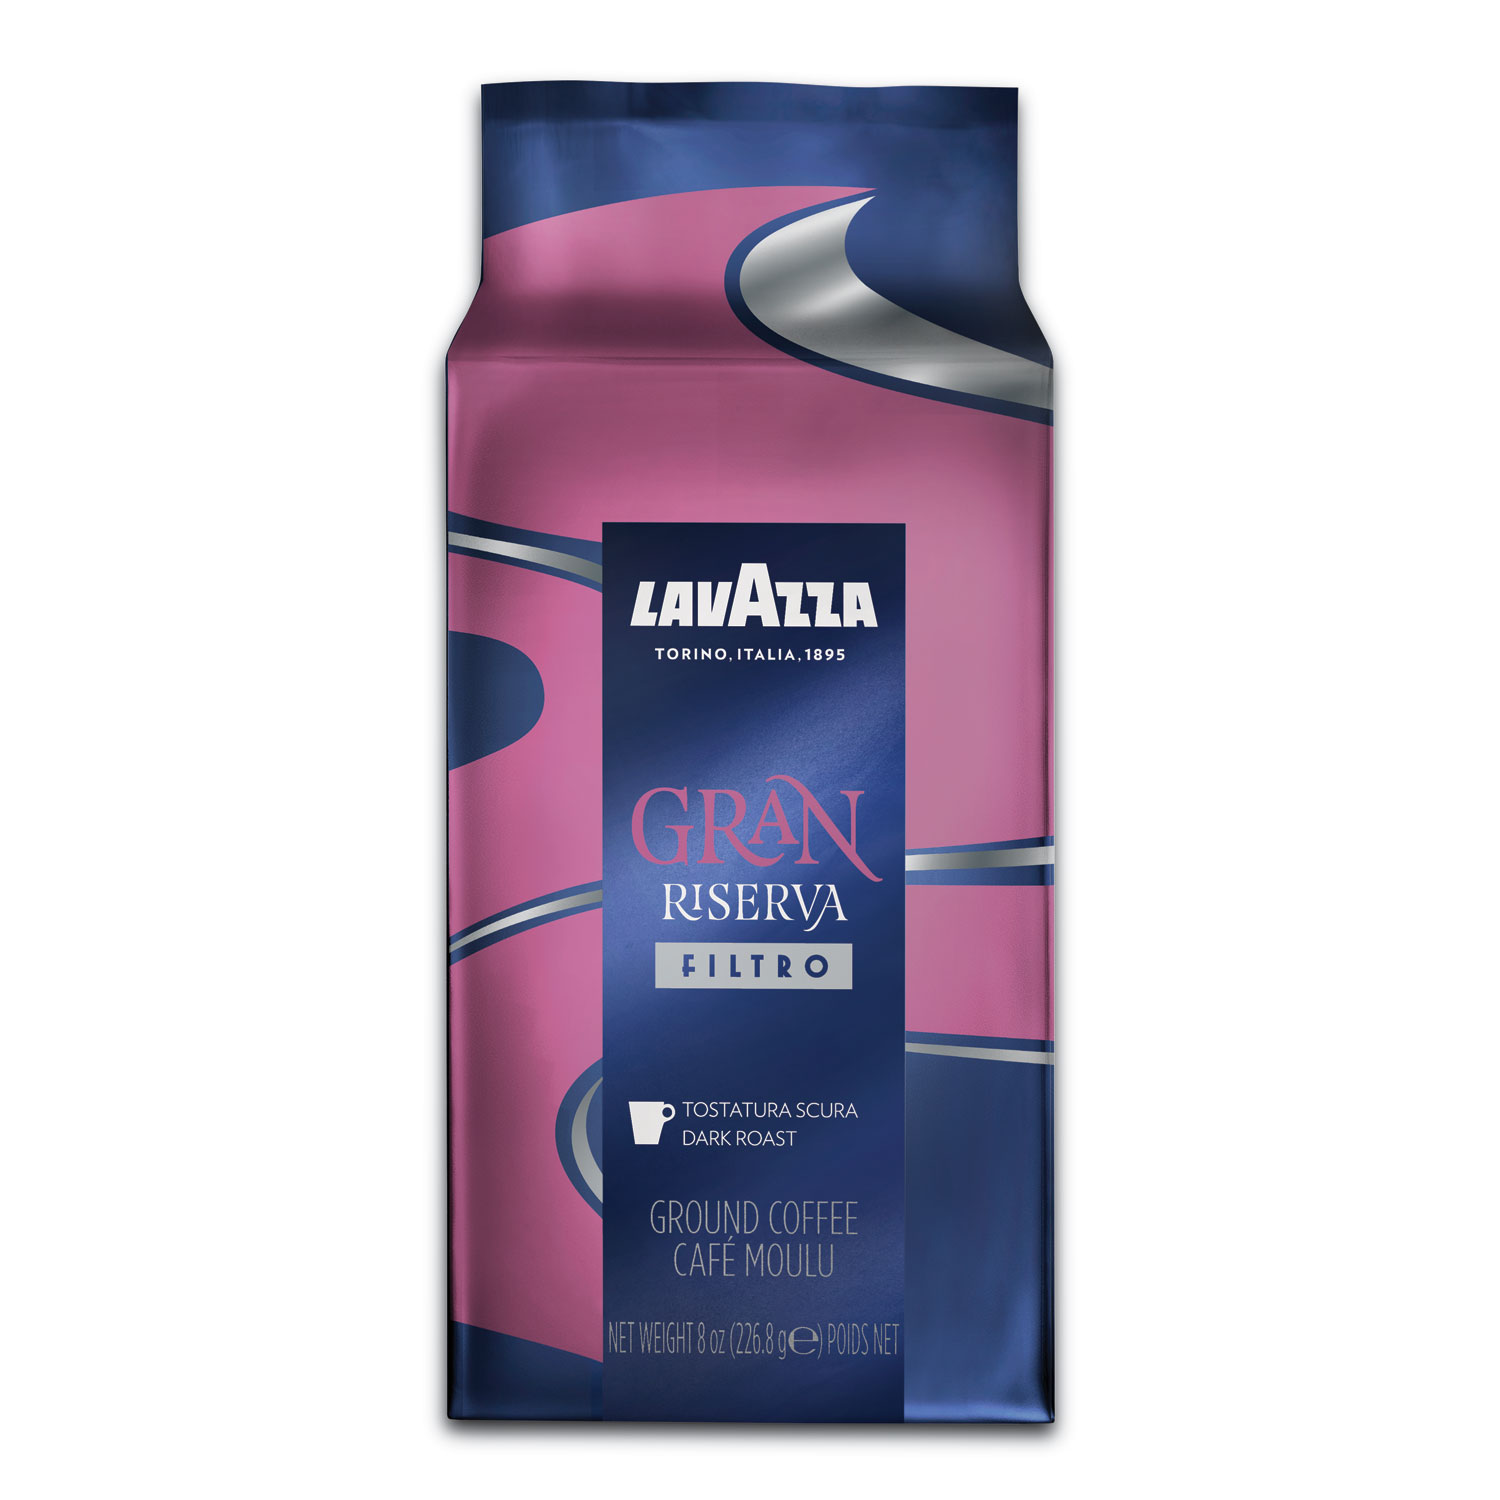  Lavazza 3451 Gran Riserva Fractional Pack Coffee, Dark and Bold, 8 oz Fraction Pack, 30/Carton (LAV3451) 